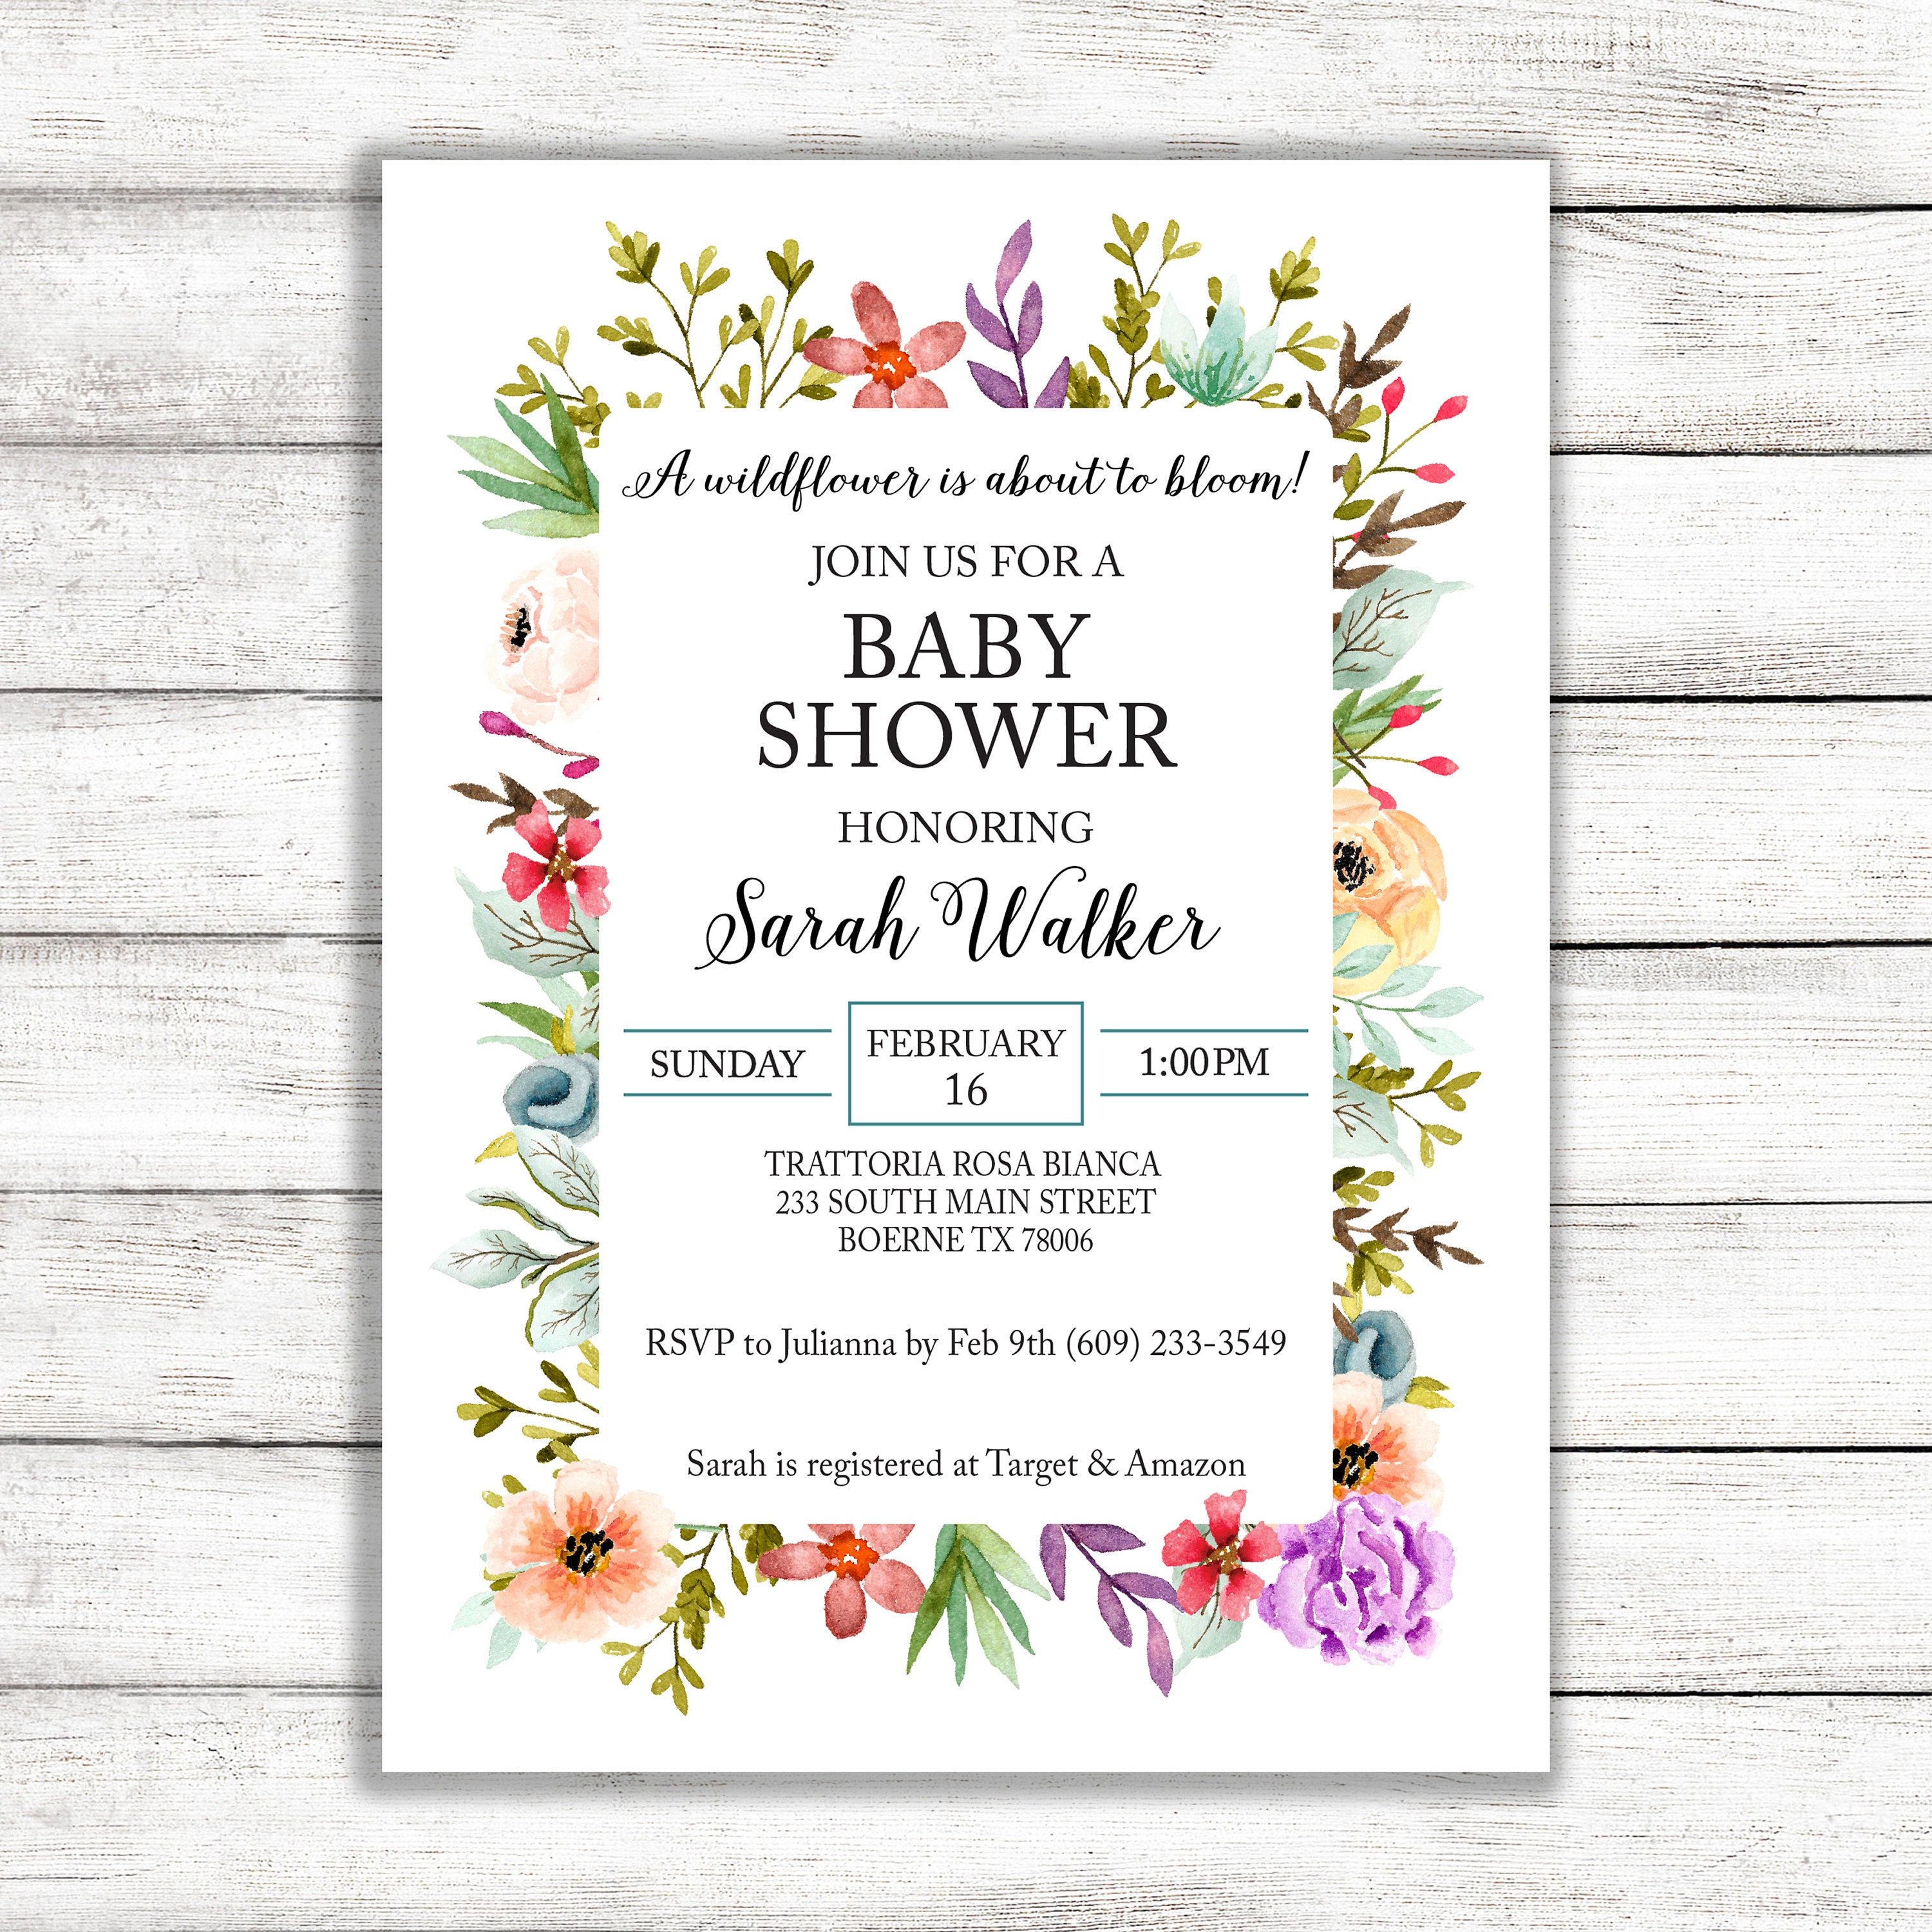 Cottage Floral Spring Floral A Little Wildflower Is On The Way Invite Meadow Flowers Baby Shower Invitation DIY Editable Template 158